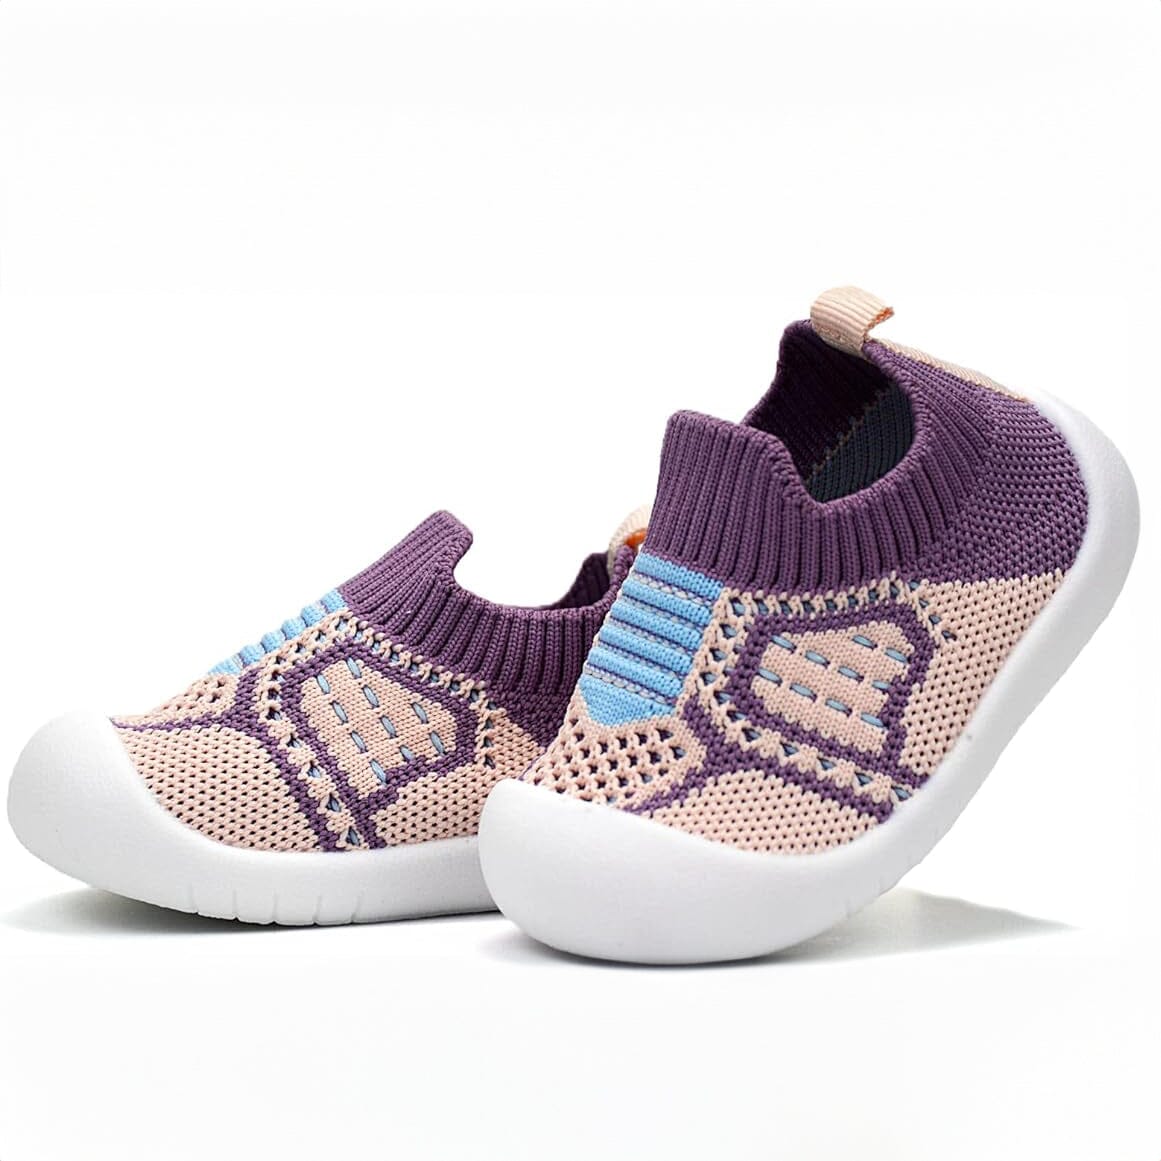 Purple Baby Mesh Shoes For First Walker